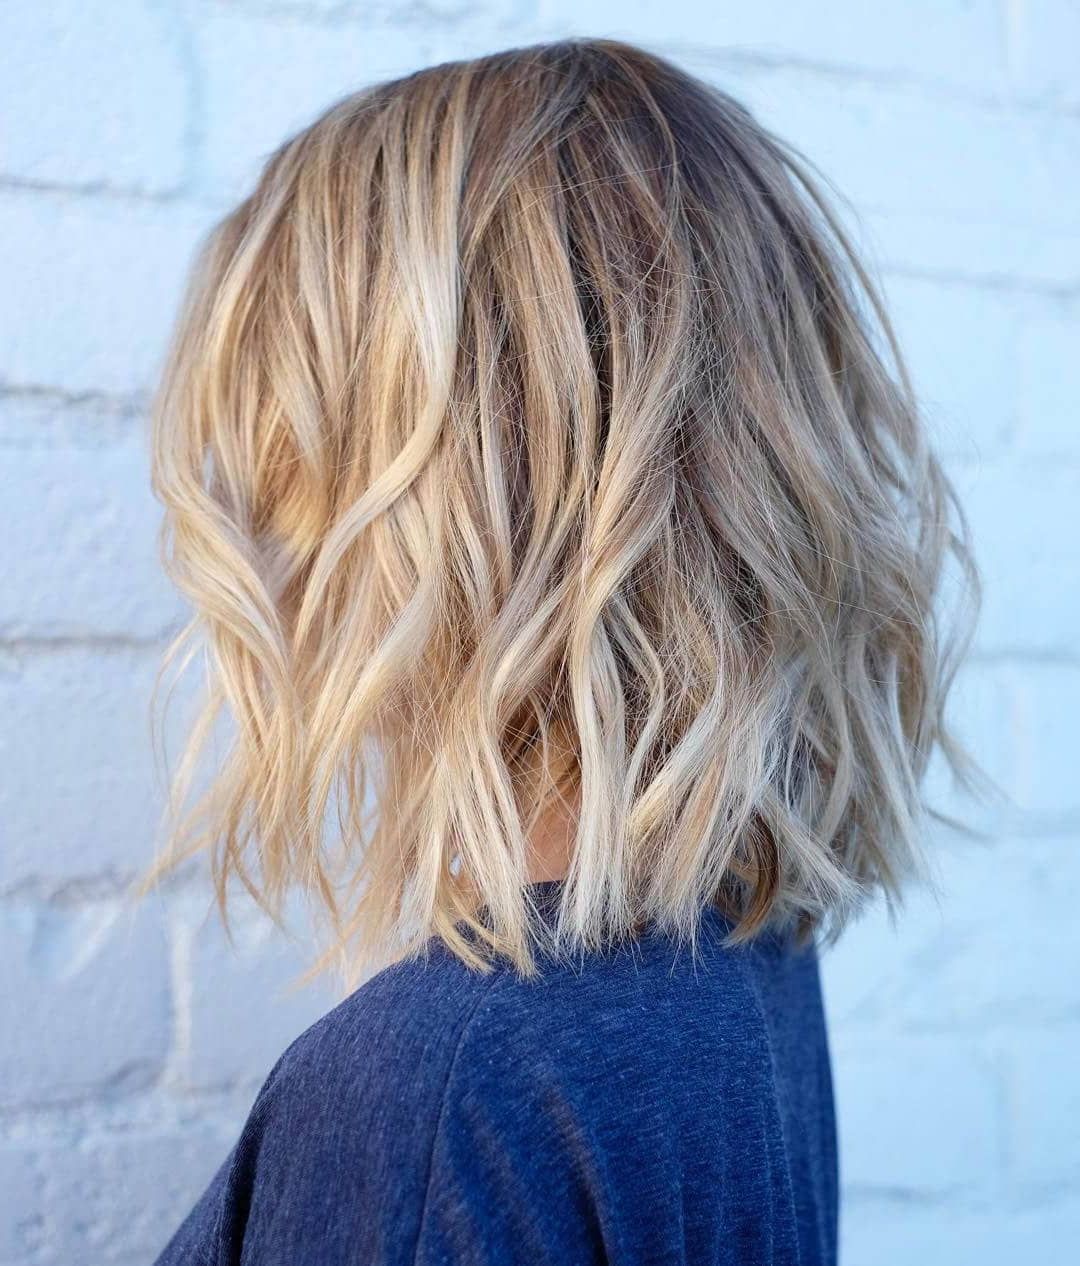 50 Fresh Short Blonde Hair Ideas To Update Your Style In 2018 Within Nape Length Blonde Curly Bob Hairstyles (Photo 12 of 25)